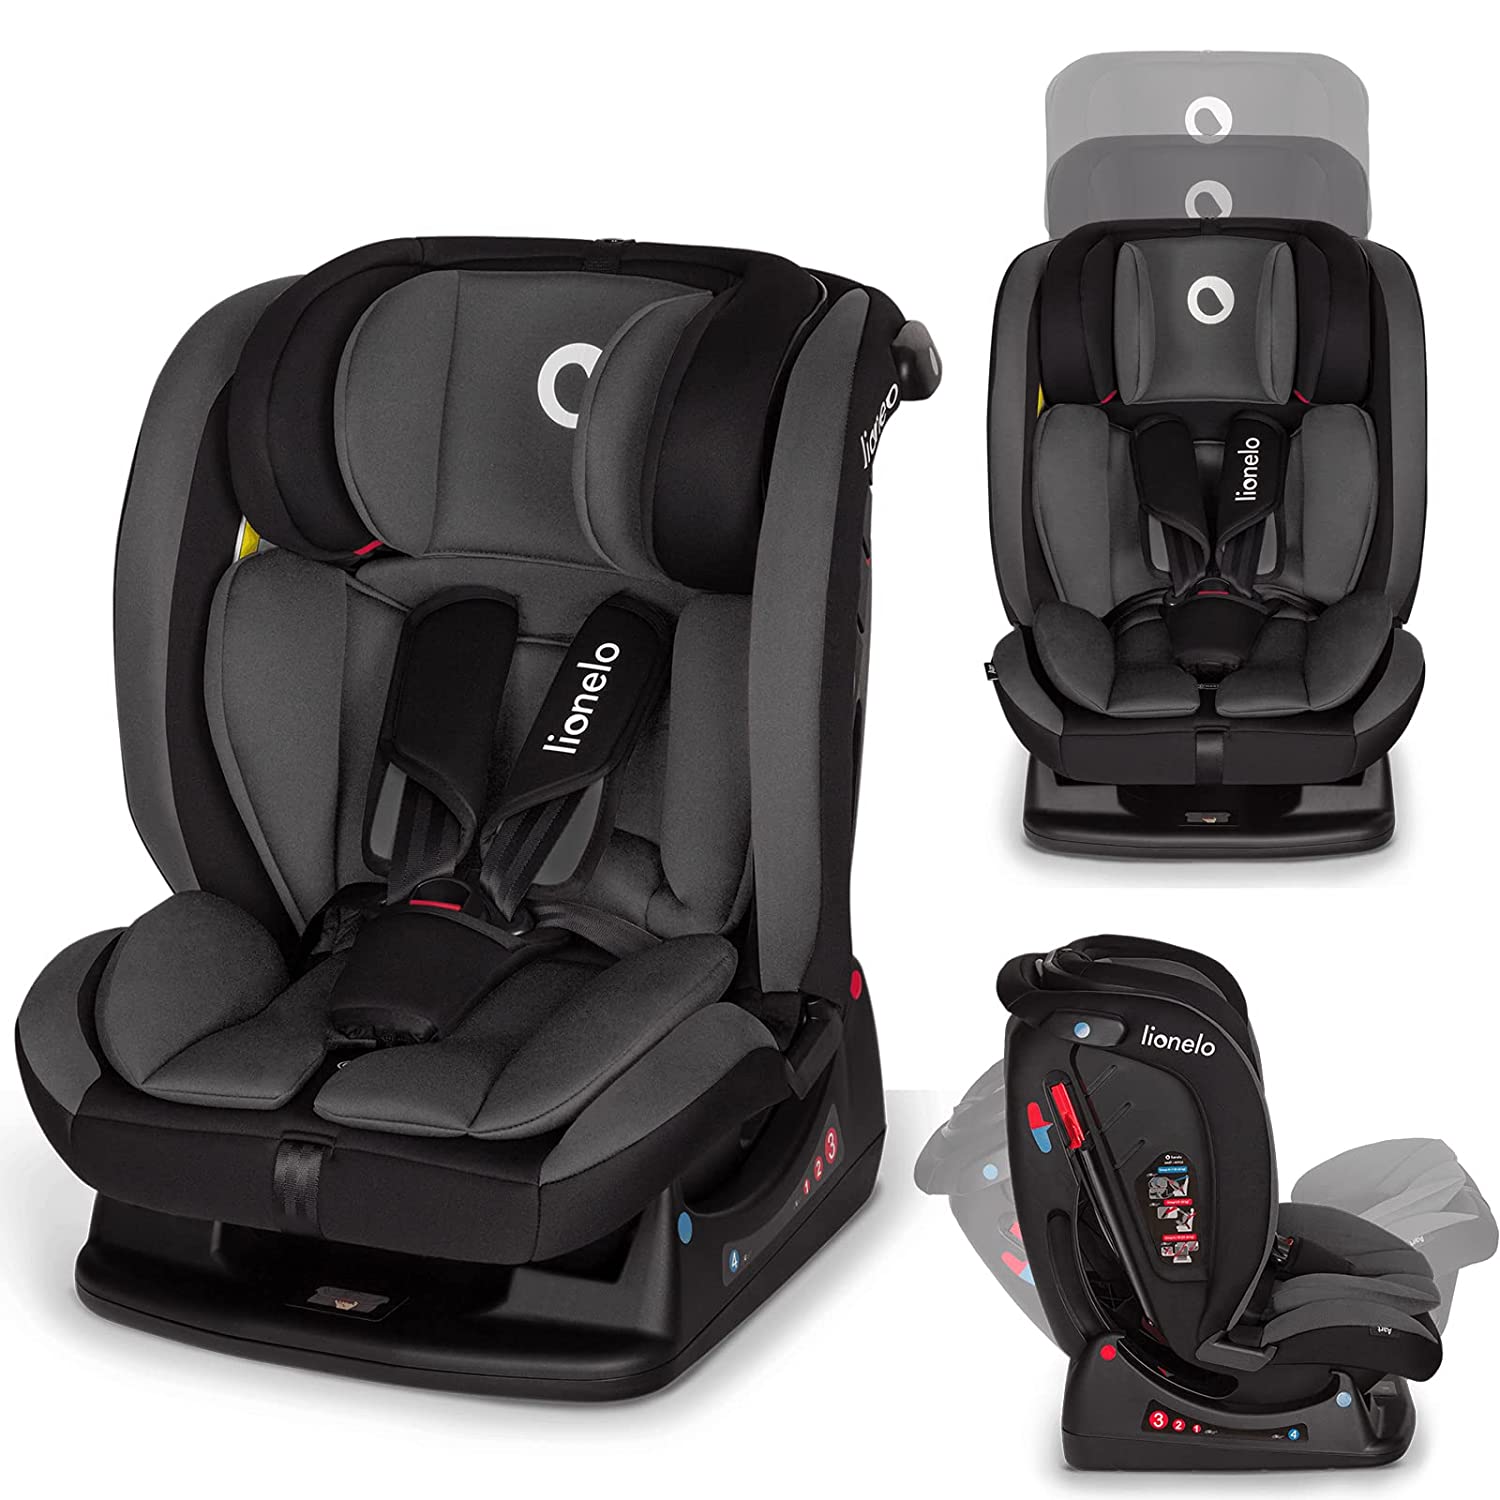 LIONELO Aart Child Car Seat from 0-36 kg, Group 0/1/2/3, ECE R44/04, 5-Point Harness System, Reverse Driving Option, Headrest and Tilt Adjustment, Additional Side Protection (Grey Stone)